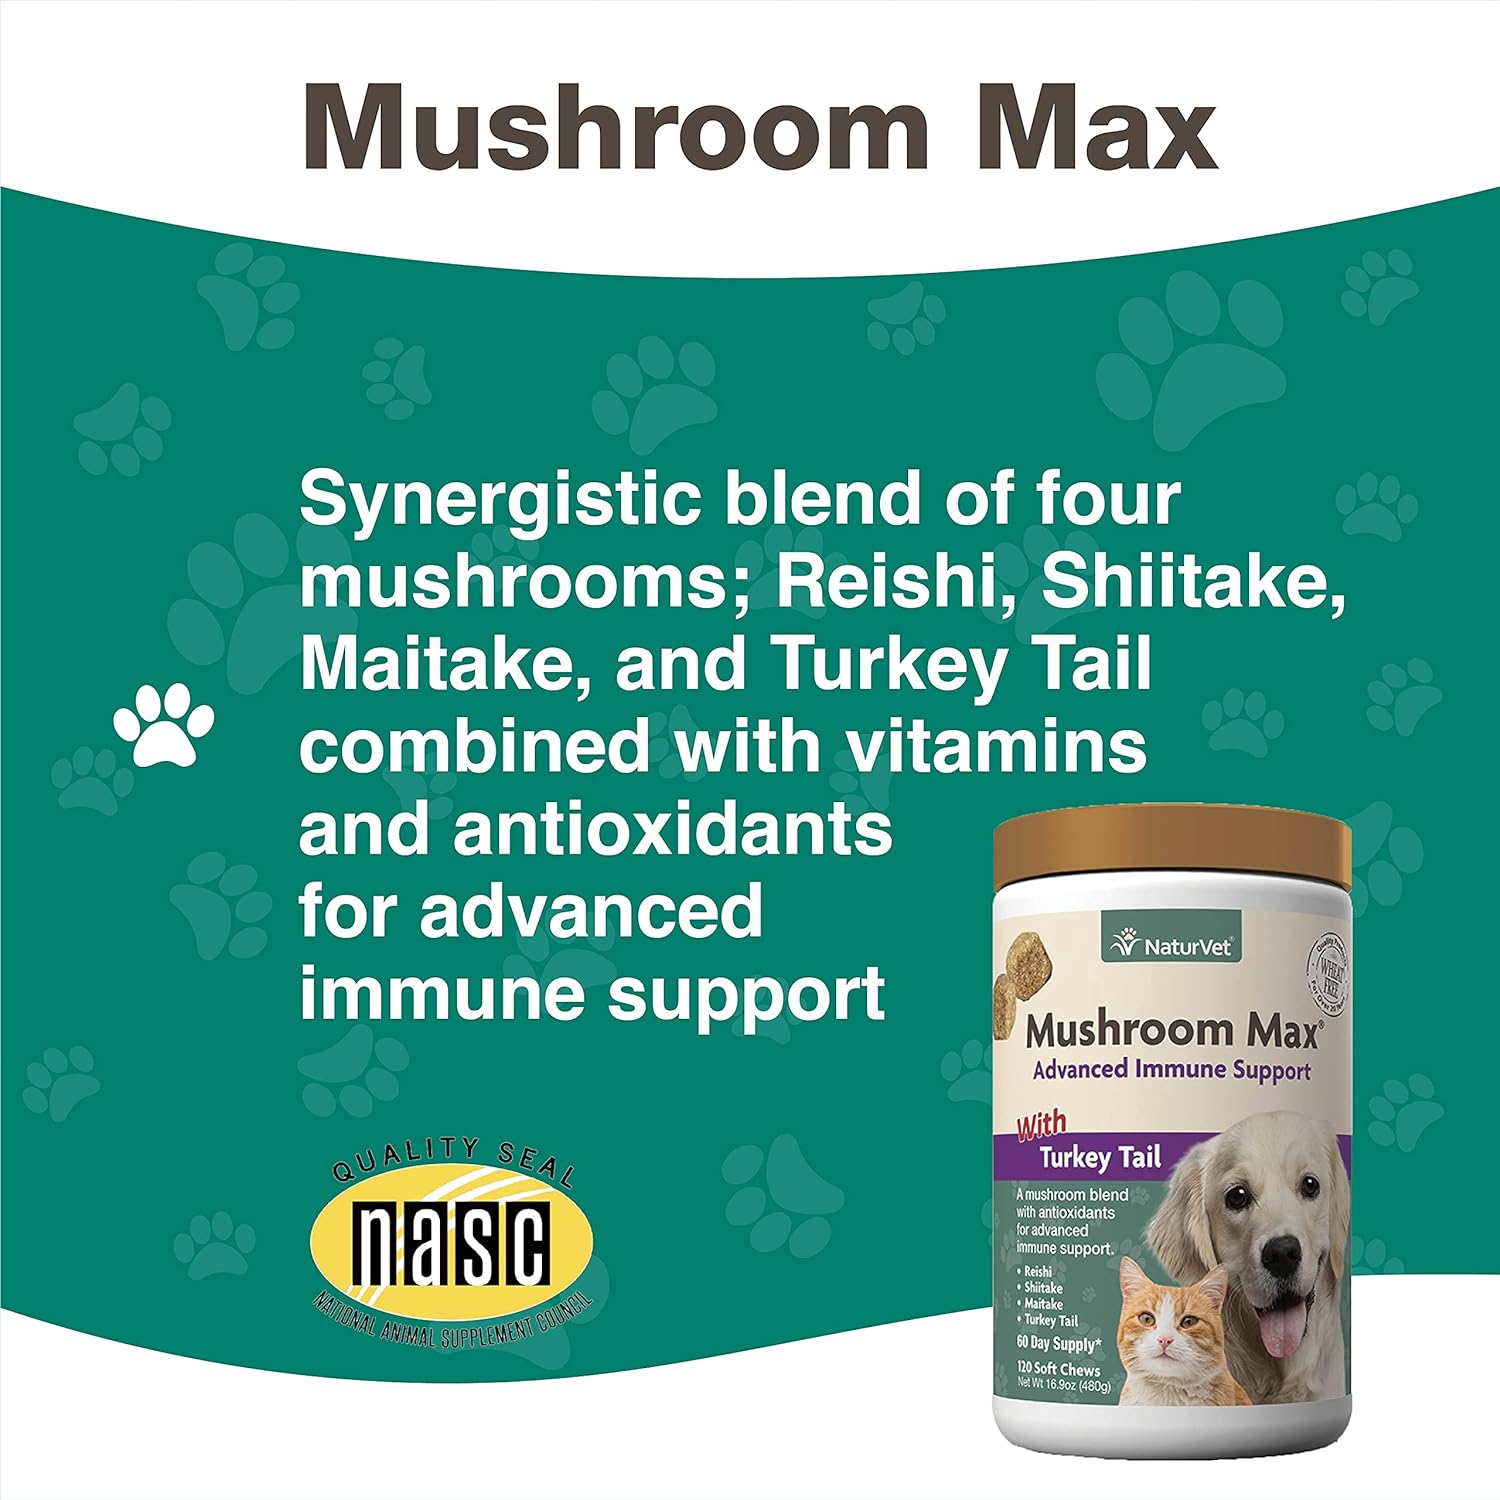 NaturVet Mushroom Max Advanced Immune Support Dog Supplement – Helps Strengthen Immunity, Overall Health for Dogs – Includes Shitake Mushrooms, Reishi, Turkey Tail – 120 Ct. : Pet Supplies